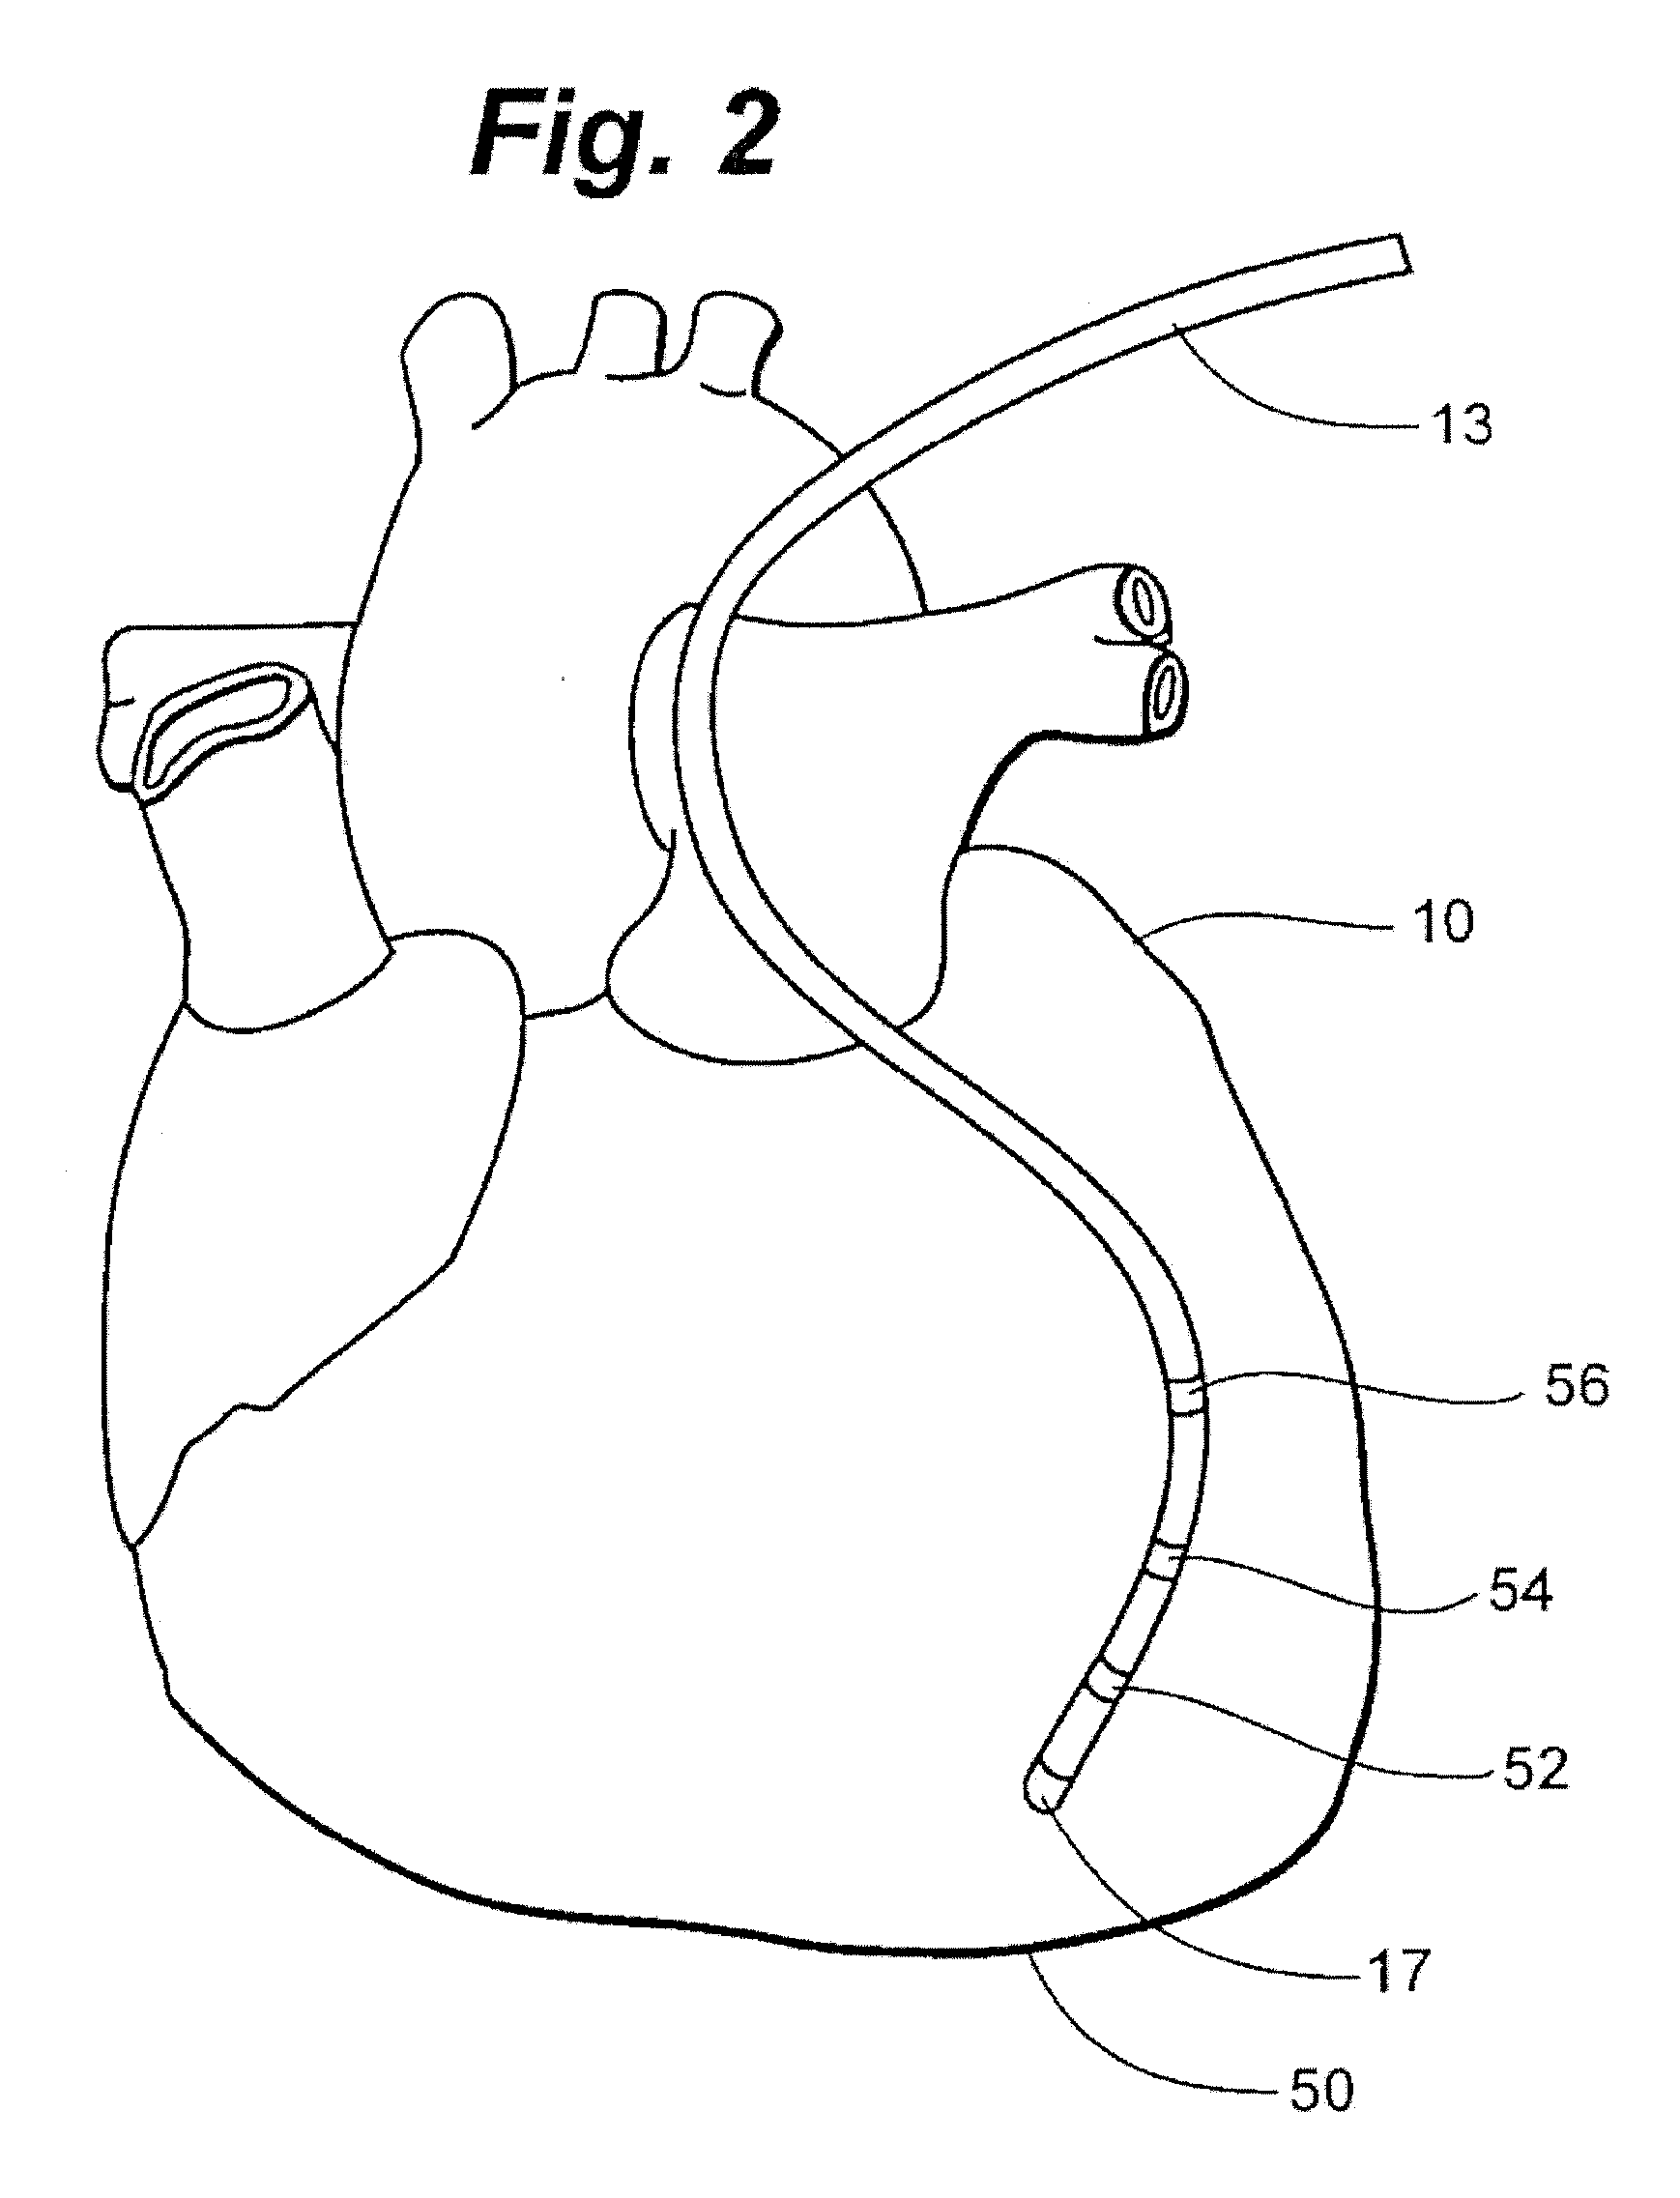 System and Method for Three Dimensional Mapping of Electrophysiology Information